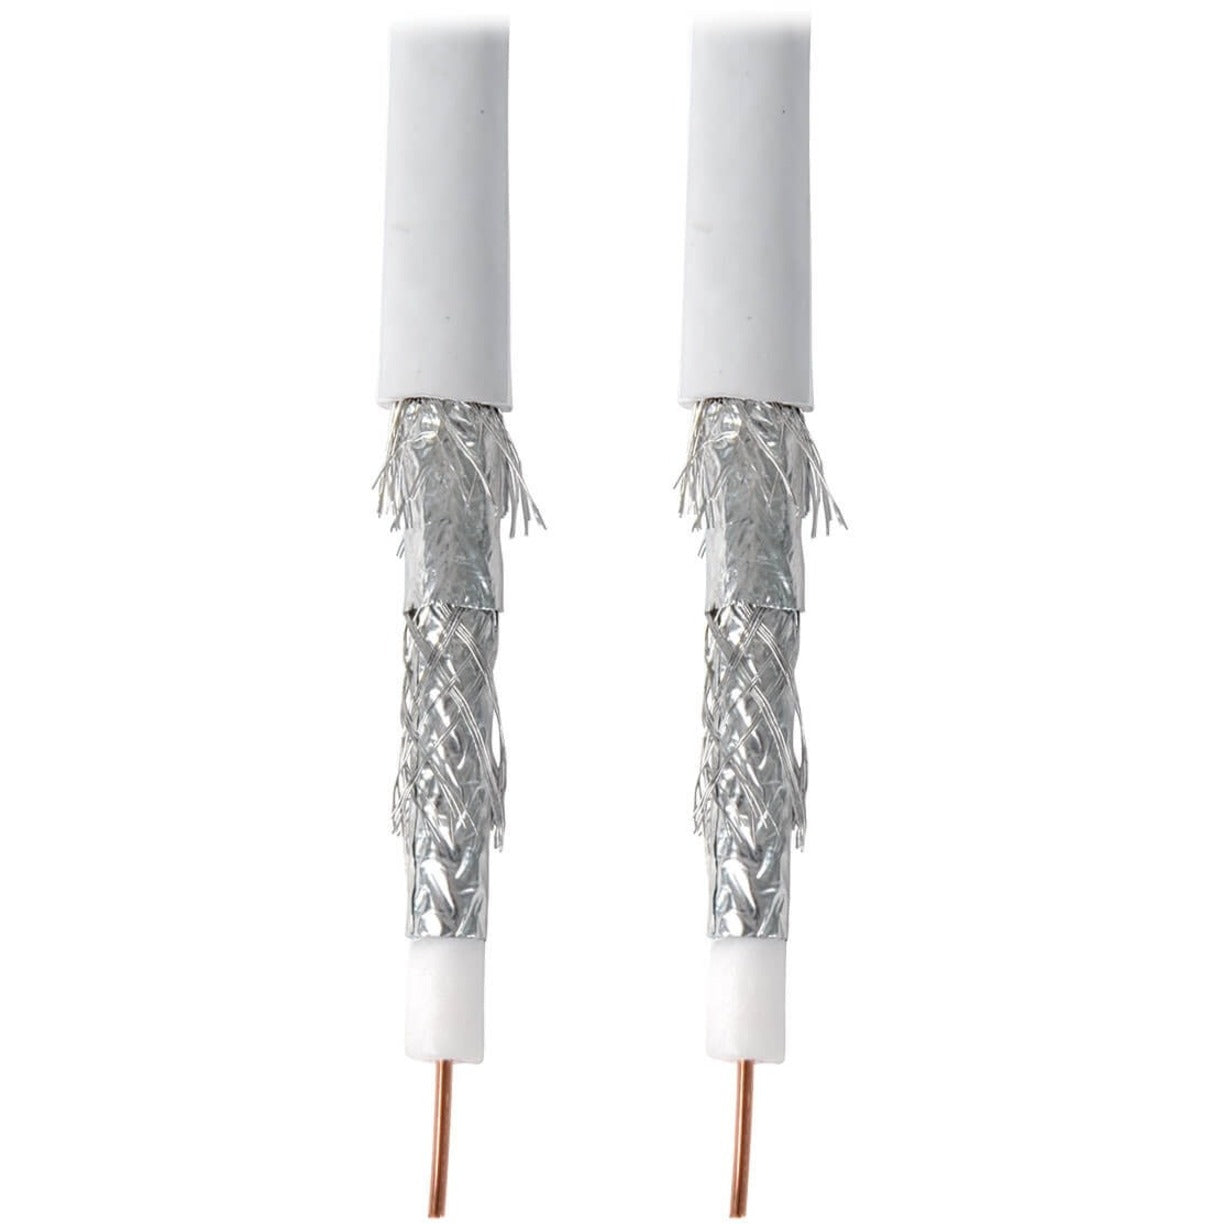 Tripp Lite A224-01K-WH RG6/U Quad-Shield CMR-Rated Coaxial Cable, White, 1000 ft